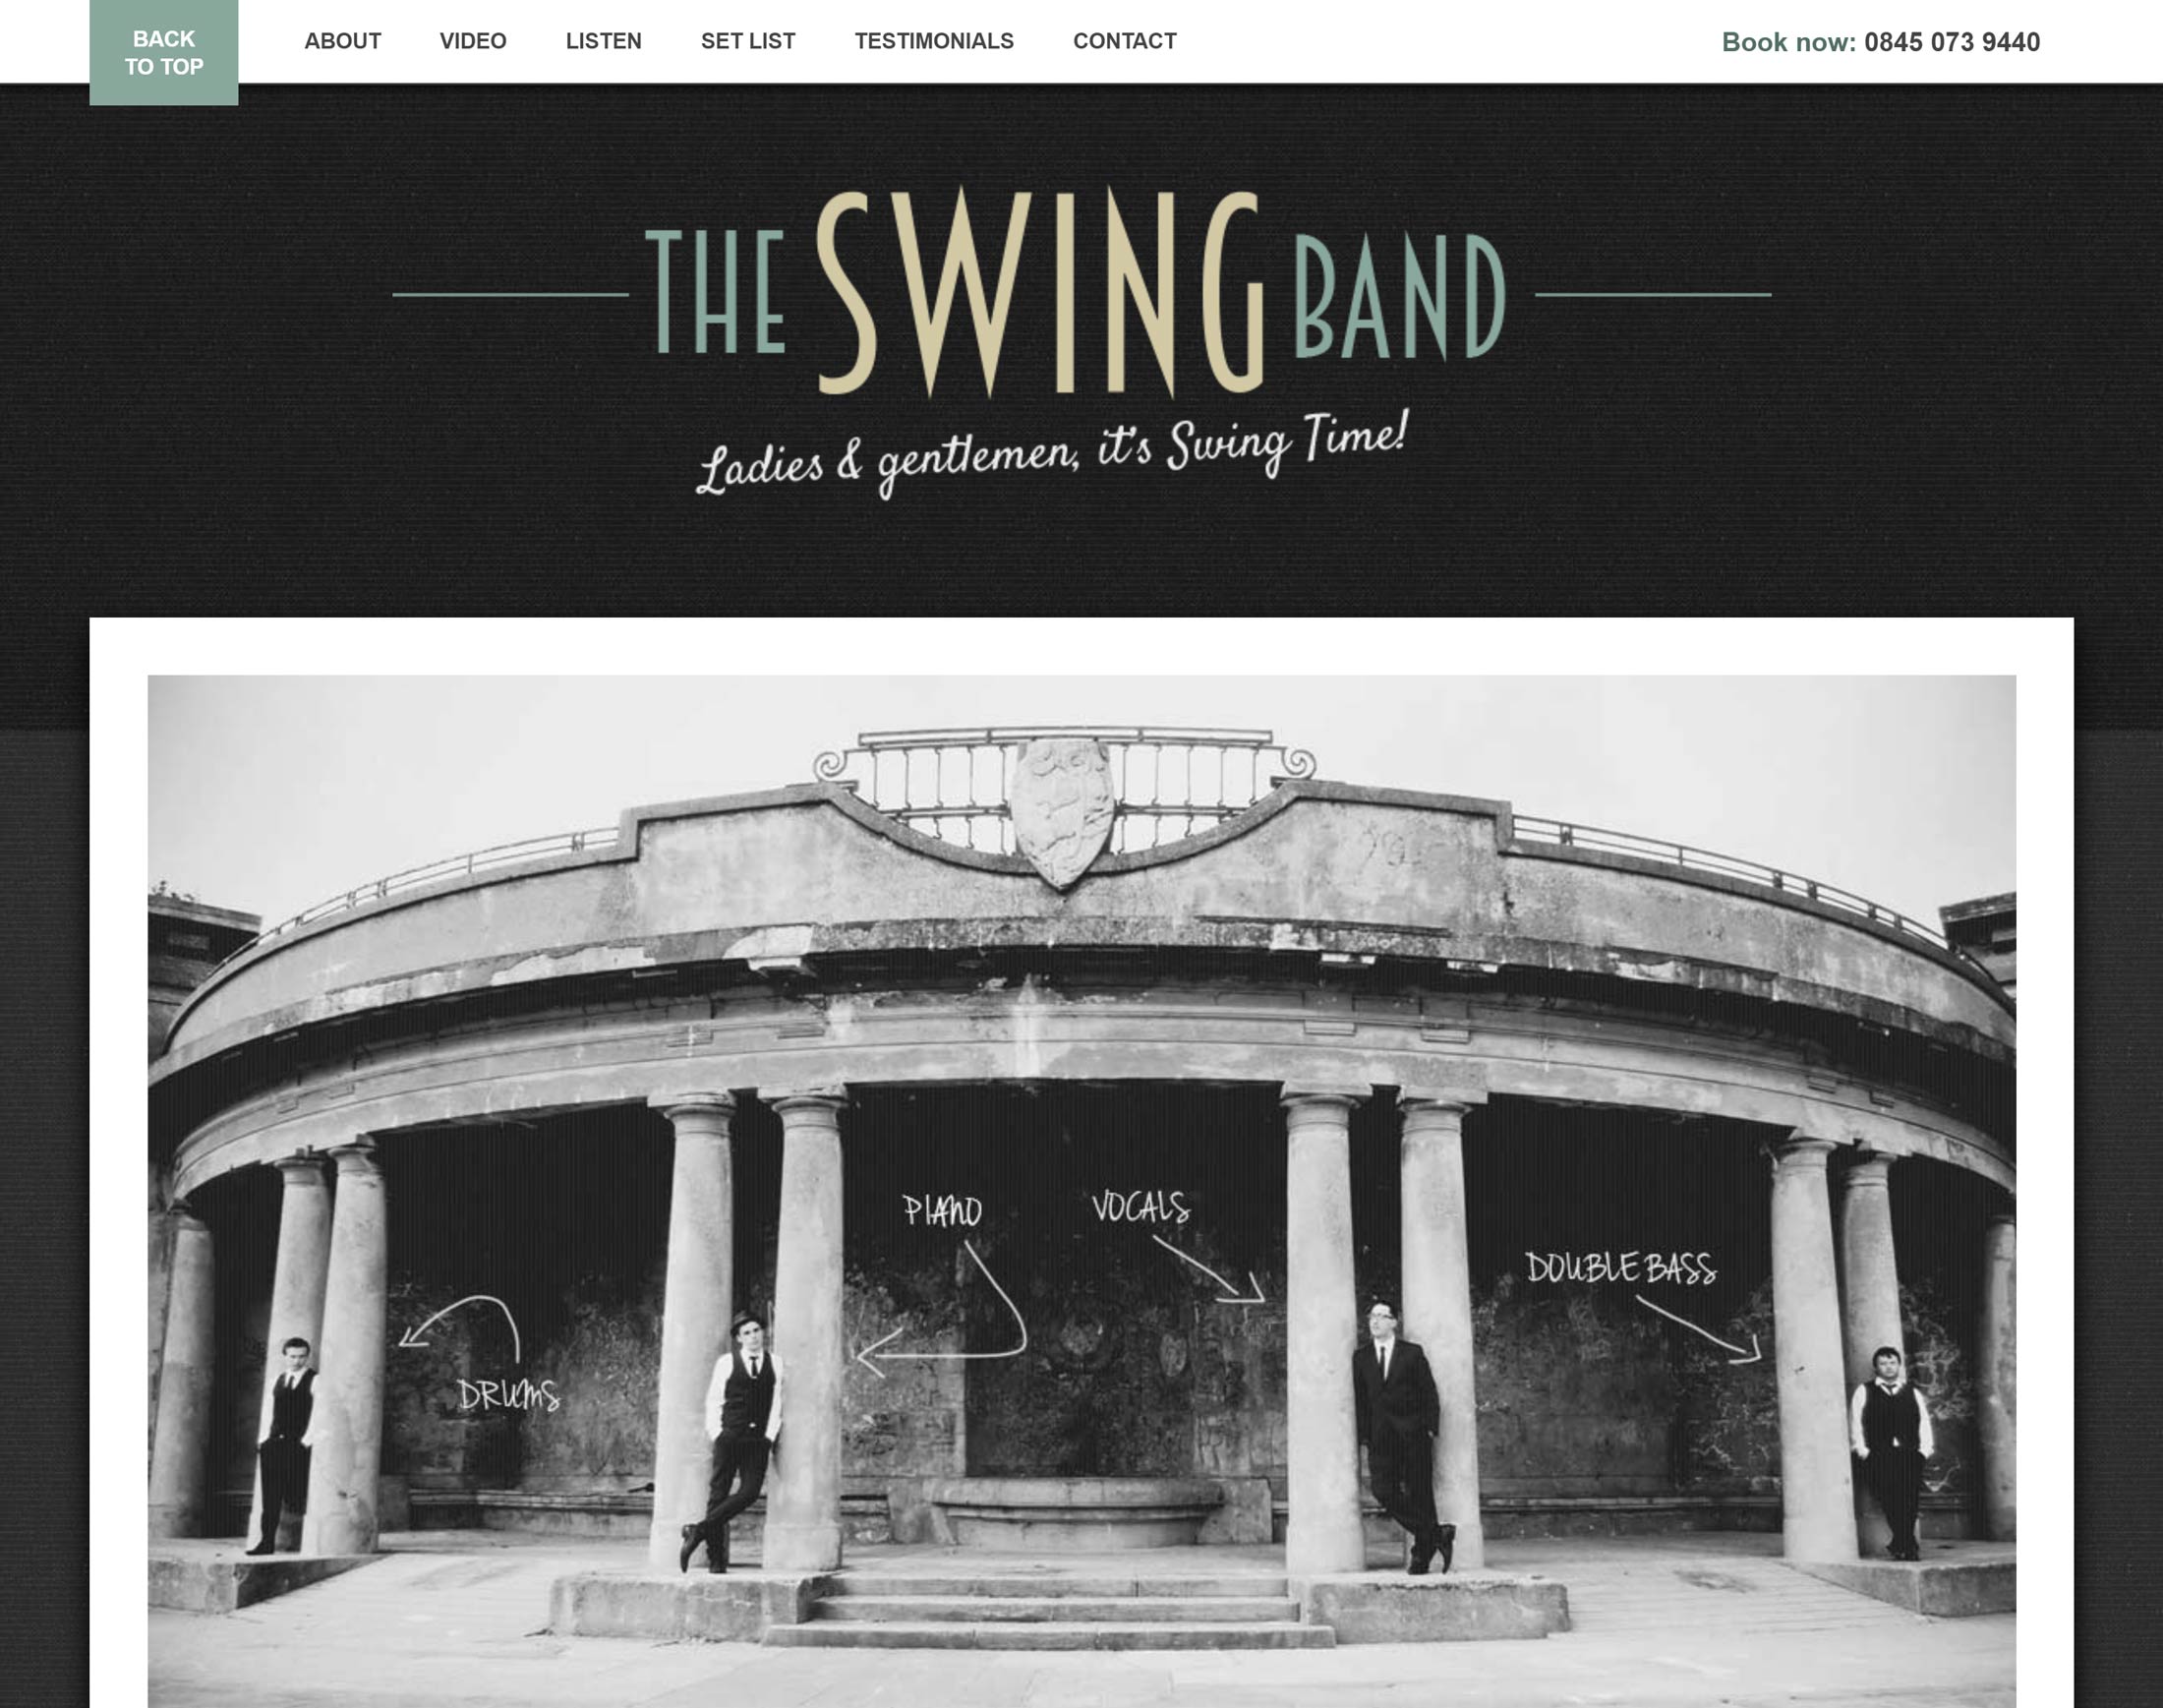 The Swing Band